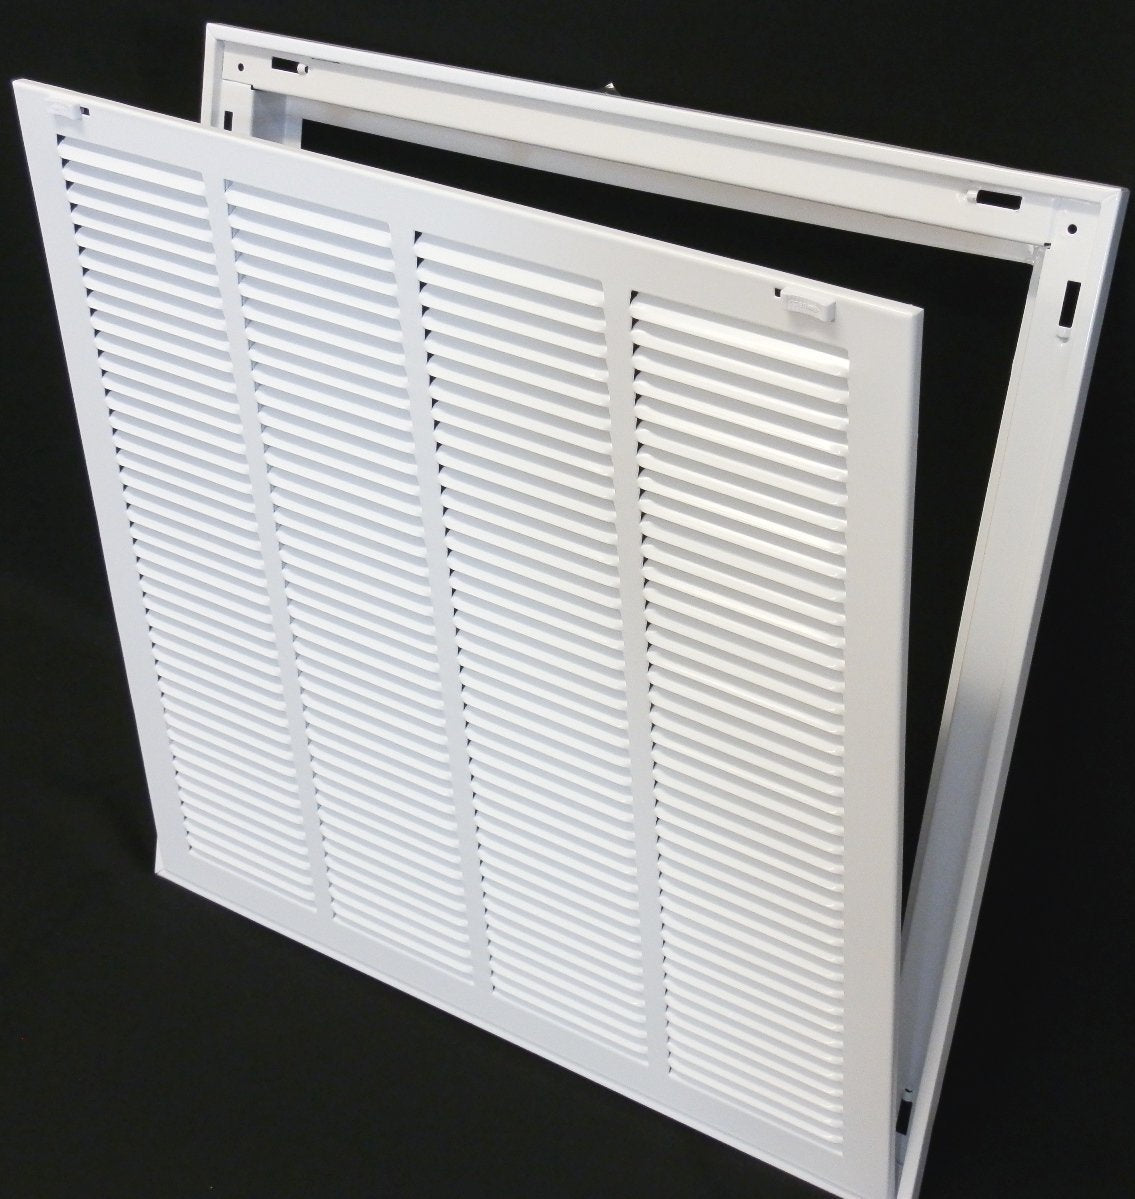 14&quot; X 22&quot; Steel Return Air Filter Grille for 1&quot; Filter - Removable Frame - [Outer Dimensions: 16 5/8&quot; X 24 5/8&quot;]